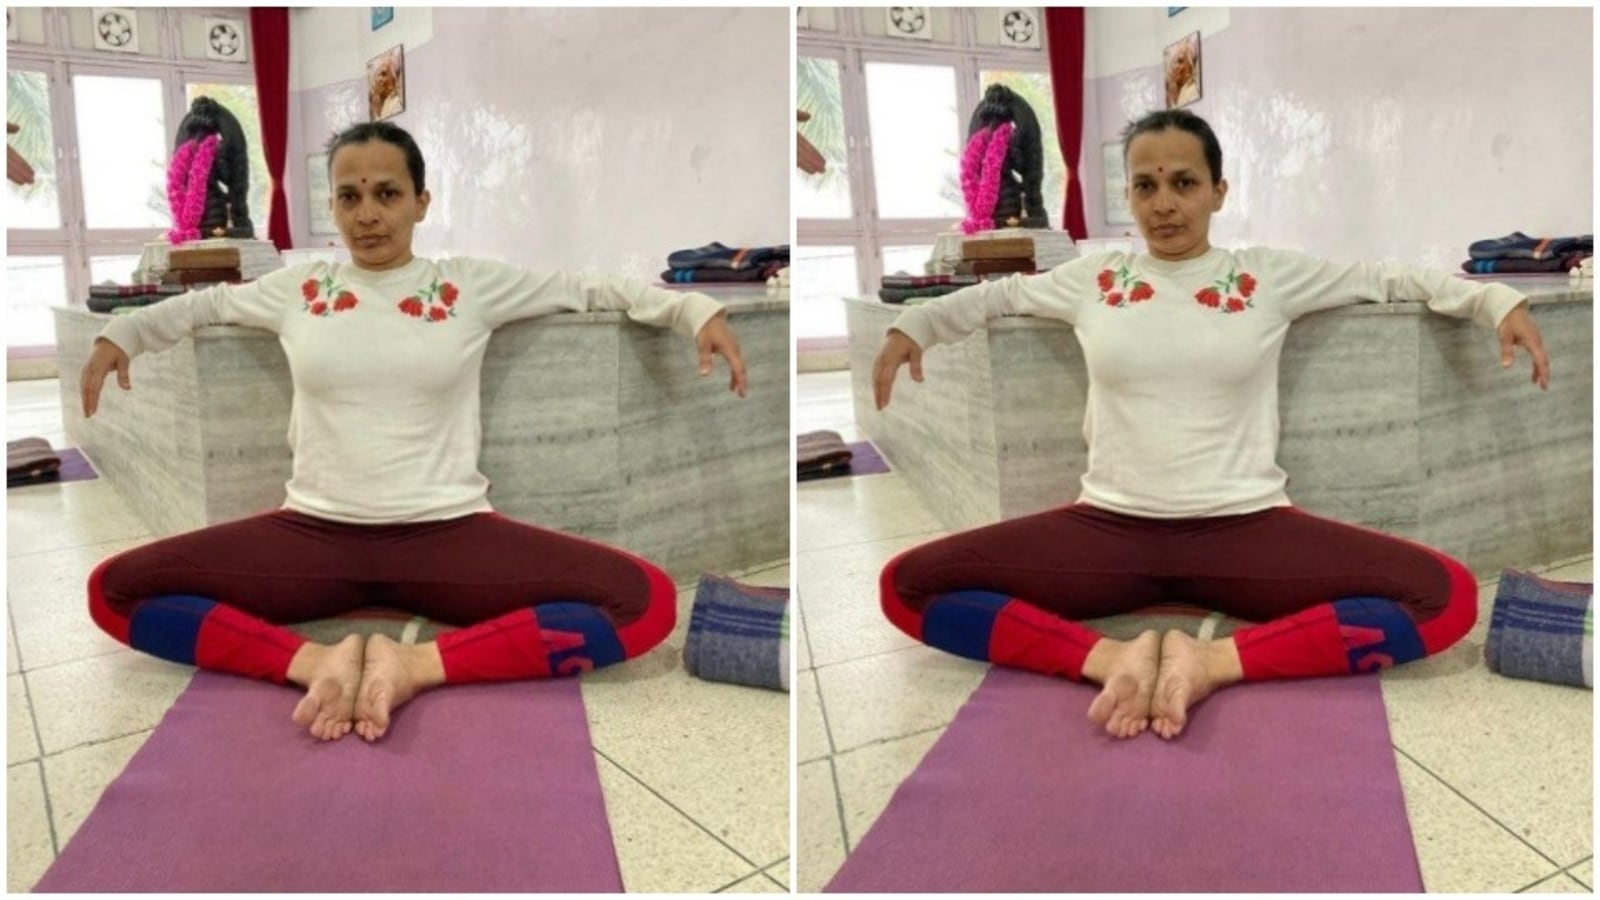 seated criss cross exercise